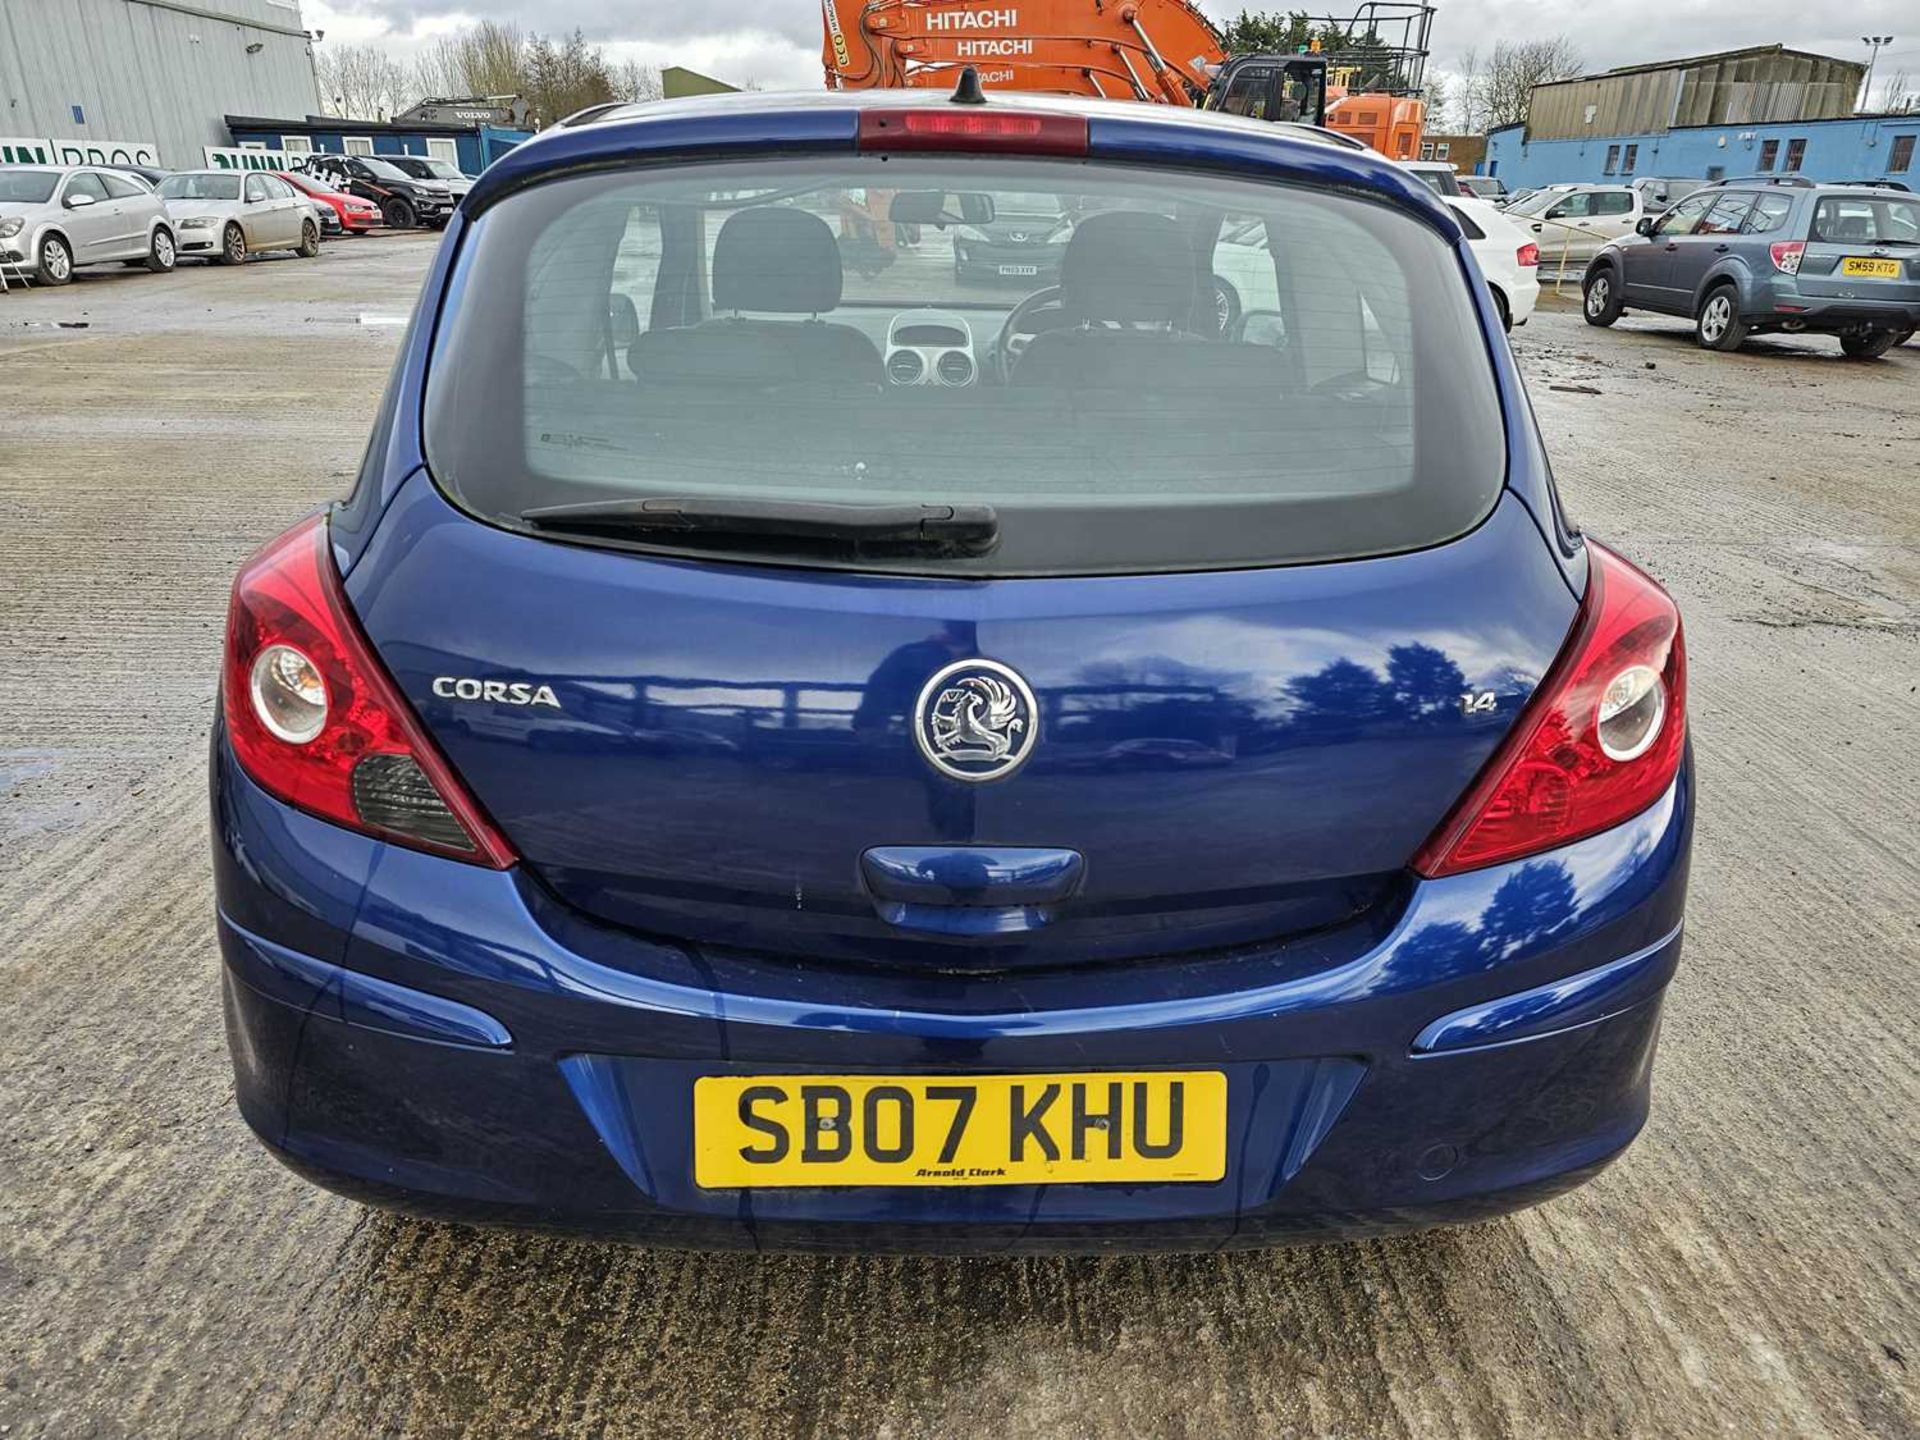 2007 Vauxhall Corsa 1.4, 5 Speed, A/C (Reg. Docs. Available) - Image 5 of 29